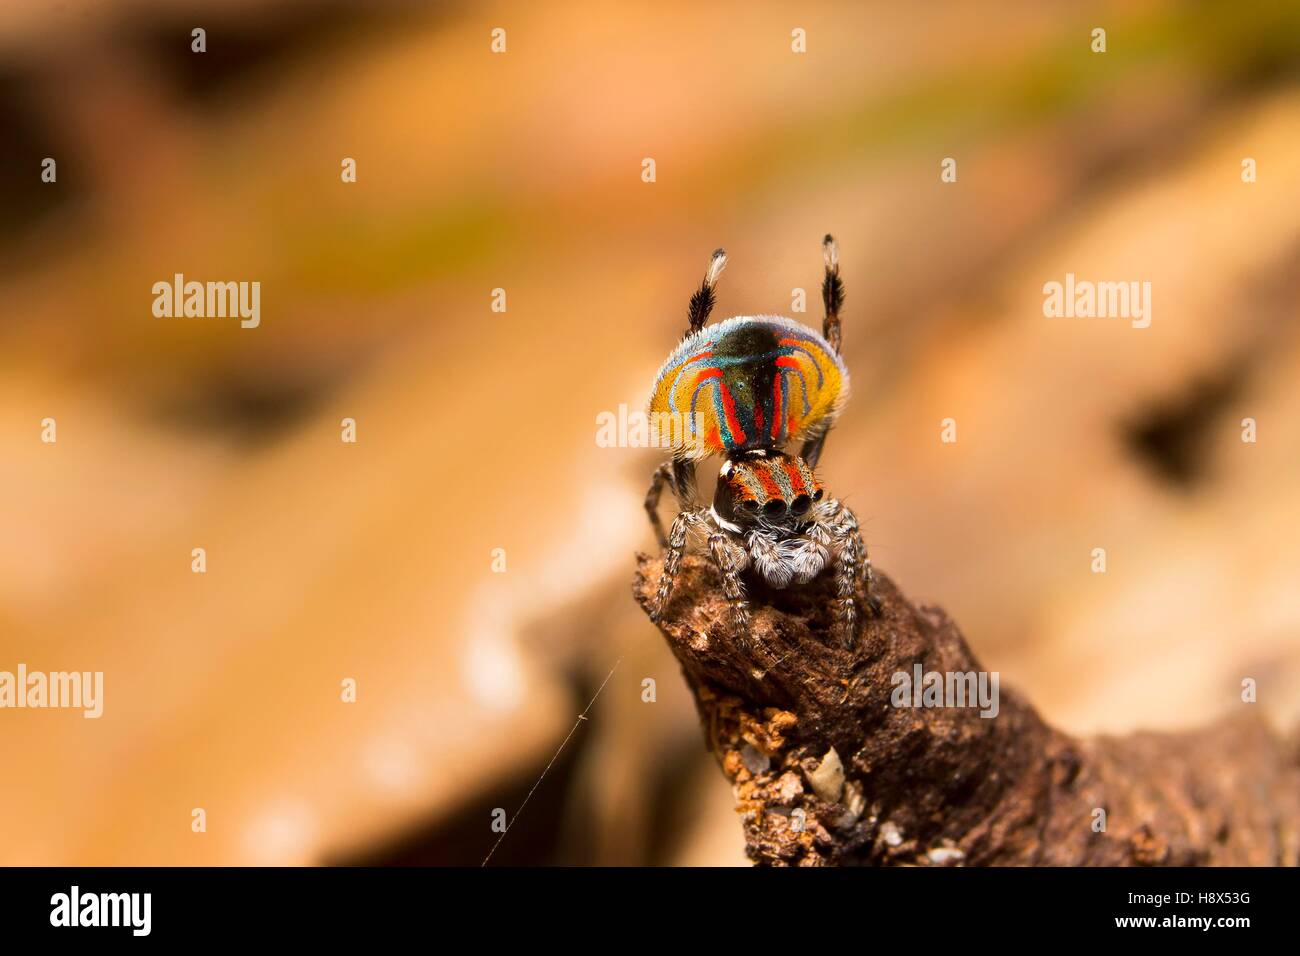 A Male Peacock Spider Maratus Volans Displaying For A Female Stock Photo Alamy